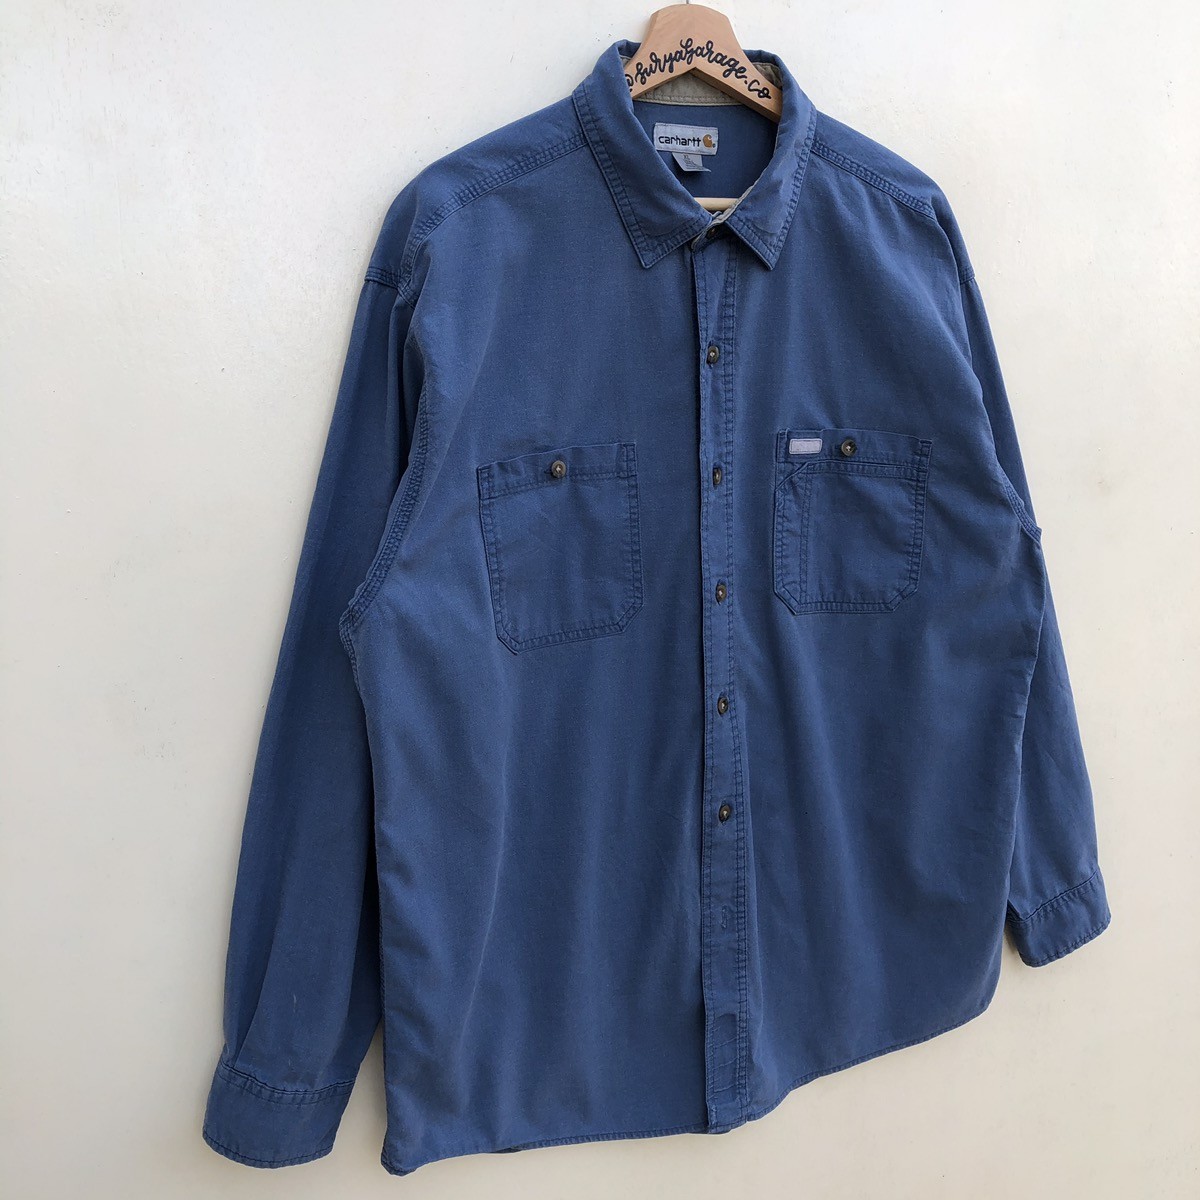 Cowley “Designed Exclusively For Rental” Shirt - 7